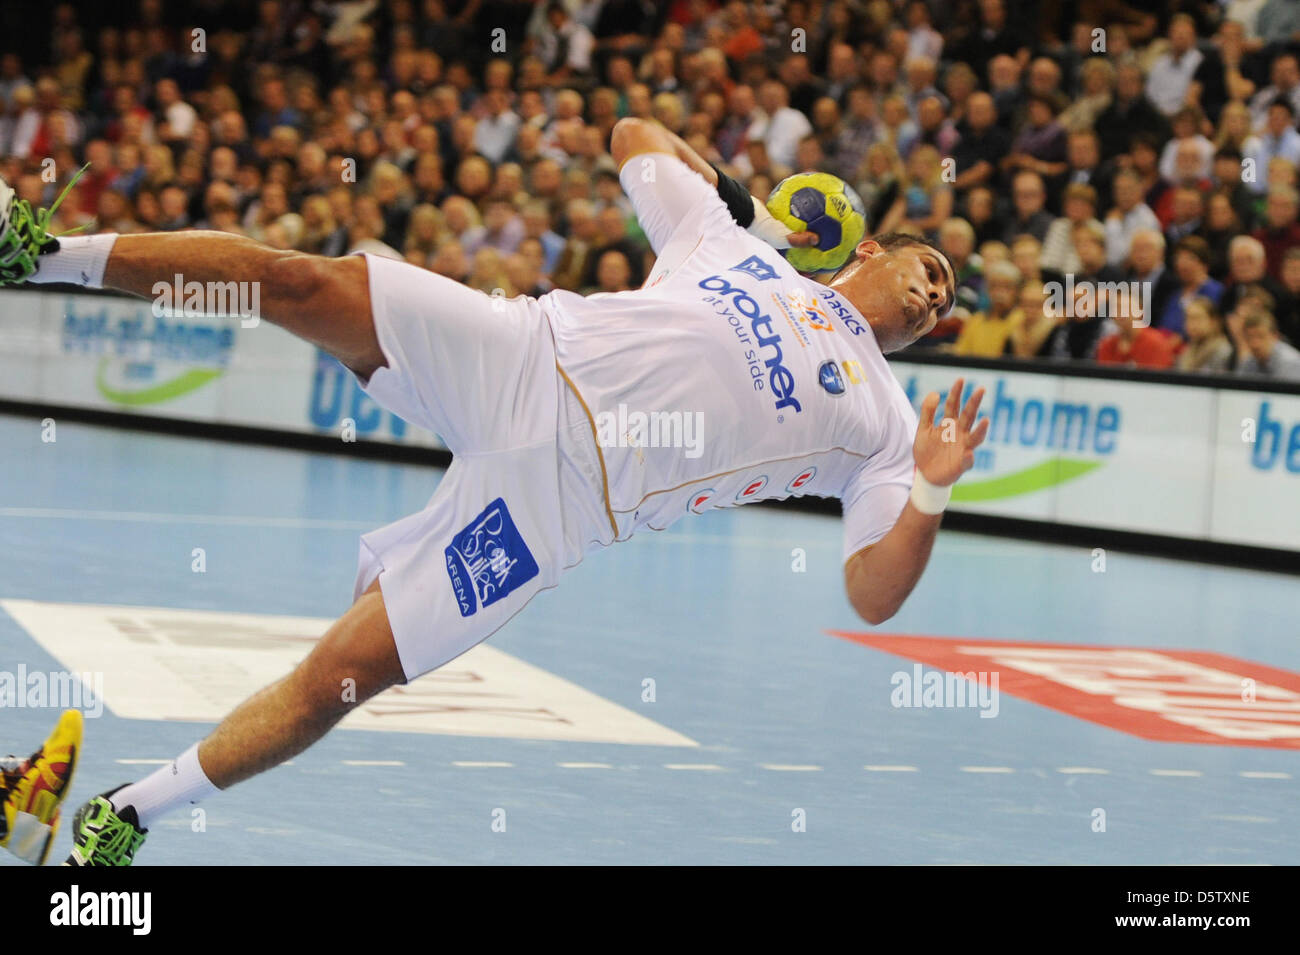 Montpellier's Issam Tej throws the ball during the European Handball Federation (EHF) Champions League match between SG Flensburg-Handewitt and Montpellier AHB at Campushalle in Flensburg, Germany, 27 September 2012. Photo: BENJAMIN NOLTE Stock Photo